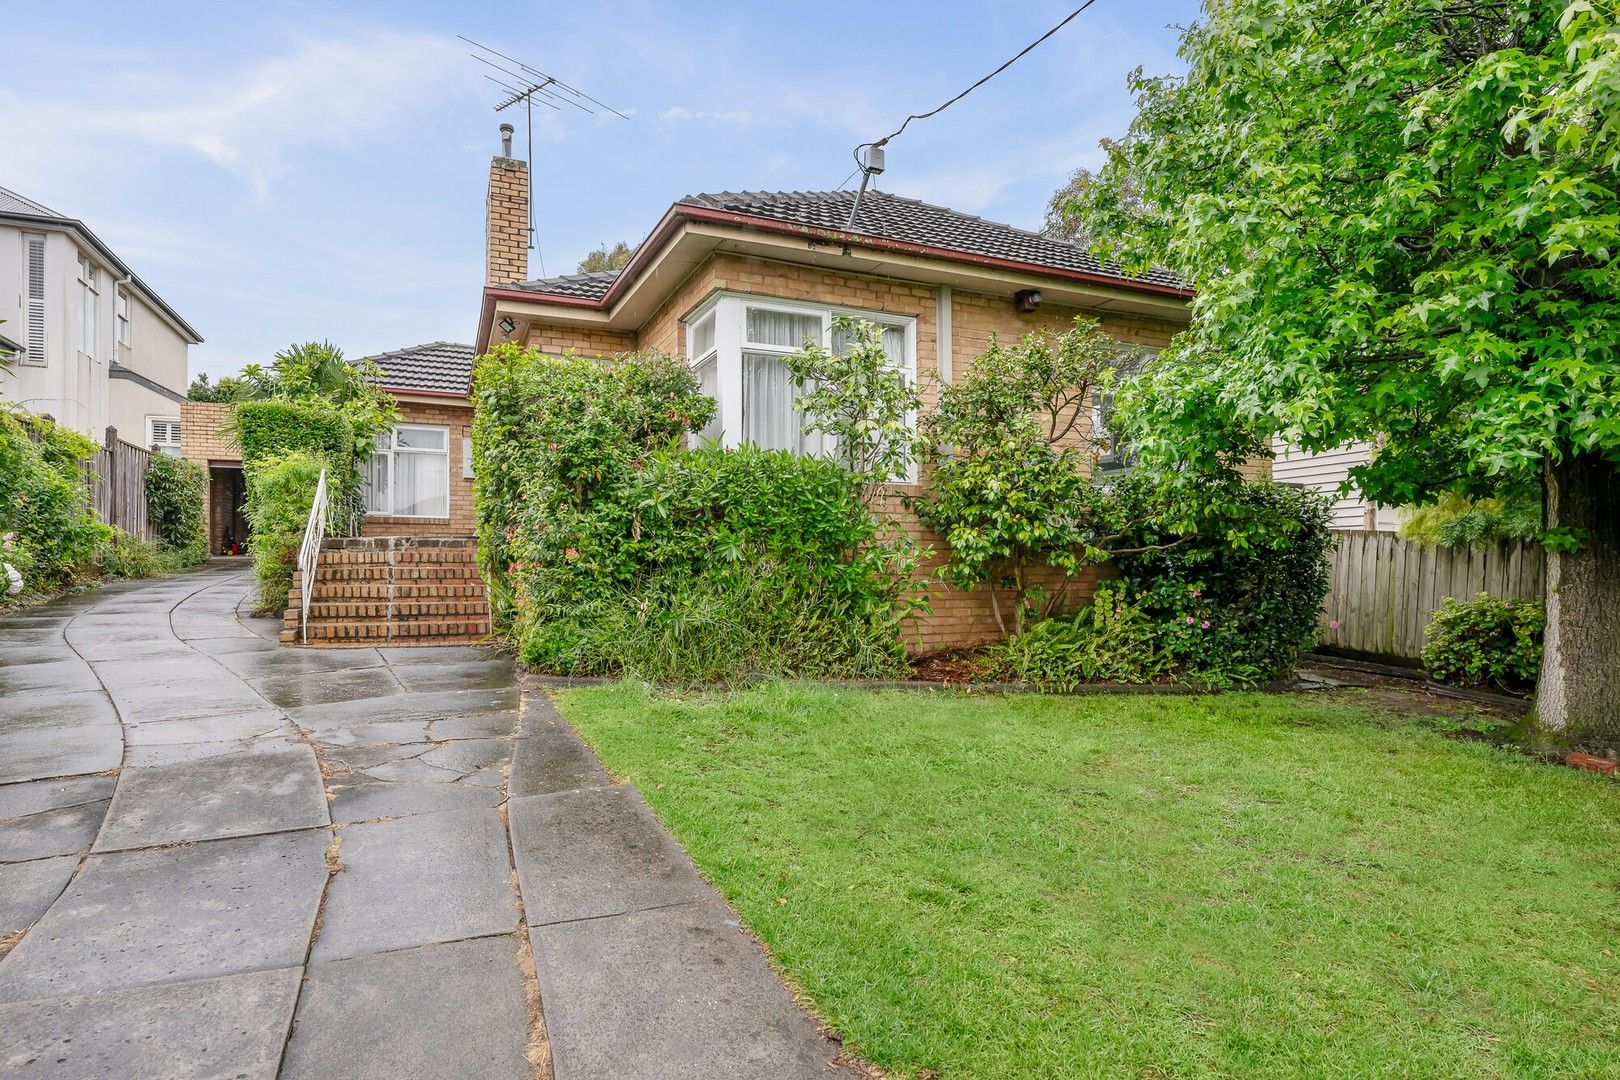 4 bedrooms House in 11 Avenue Road CAMBERWELL VIC, 3124